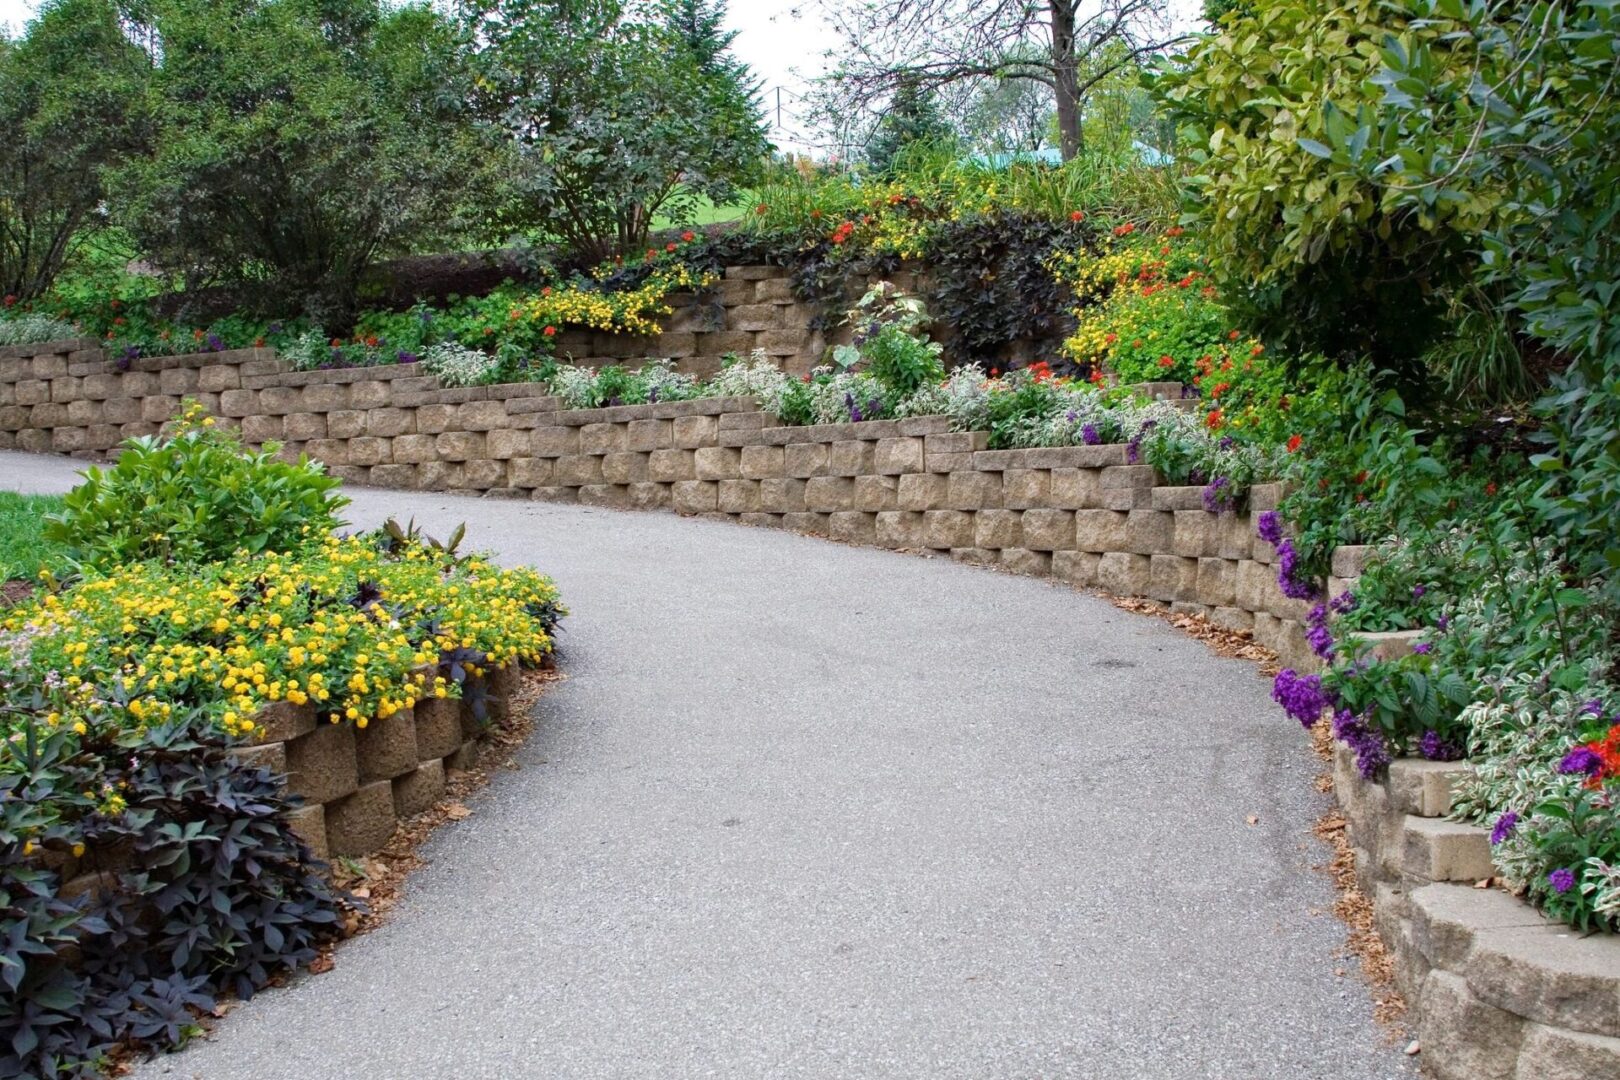 A curved driveway with stone walls and flowers.